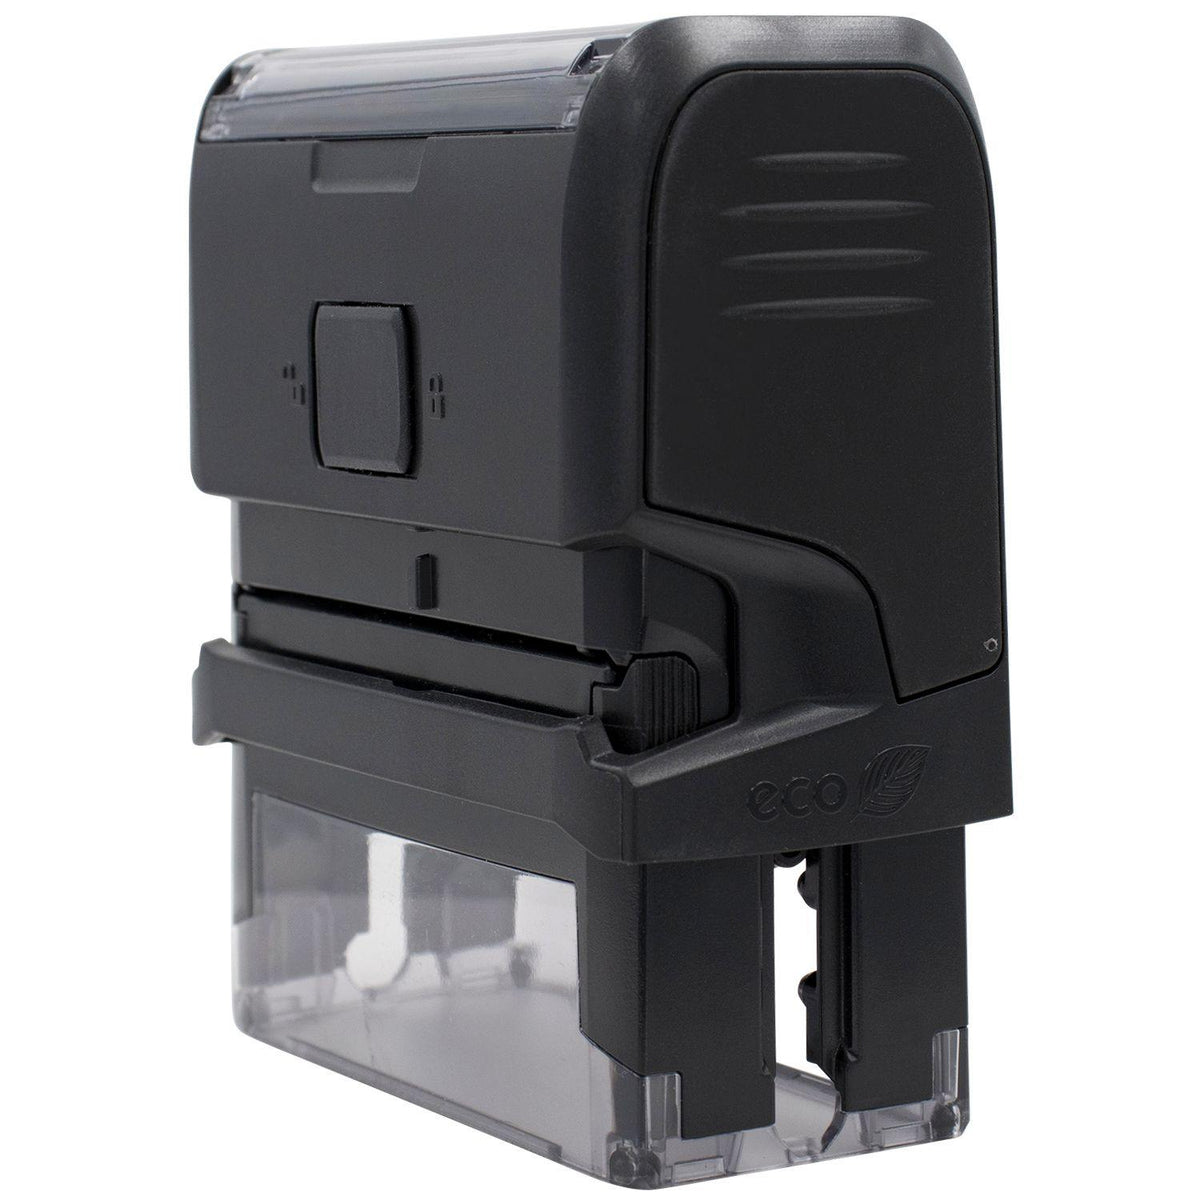 Large Self-Inking Devolver Copia Stamp - Engineer Seal Stamps - Brand_Trodat, Impression Size_Large, Stamp Type_Self-Inking Stamp, Type of Use_General, Type of Use_Office